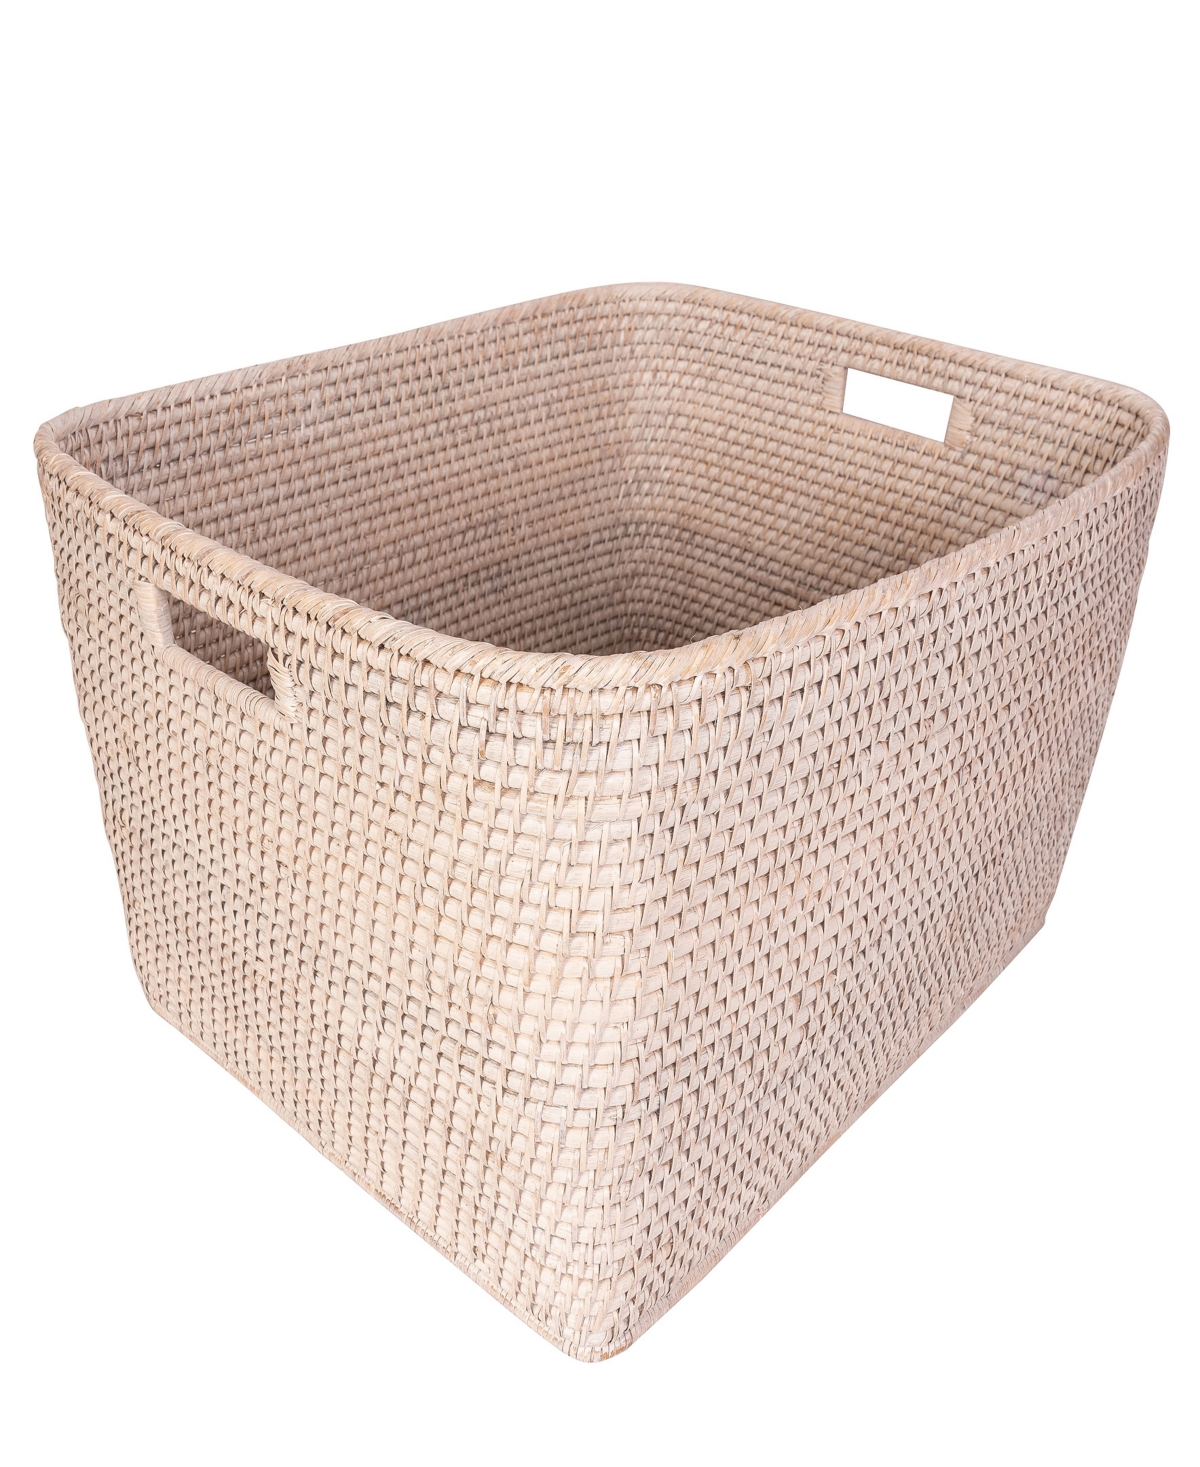 Saboga Home Family Basket with Cutout Handle - White Wash